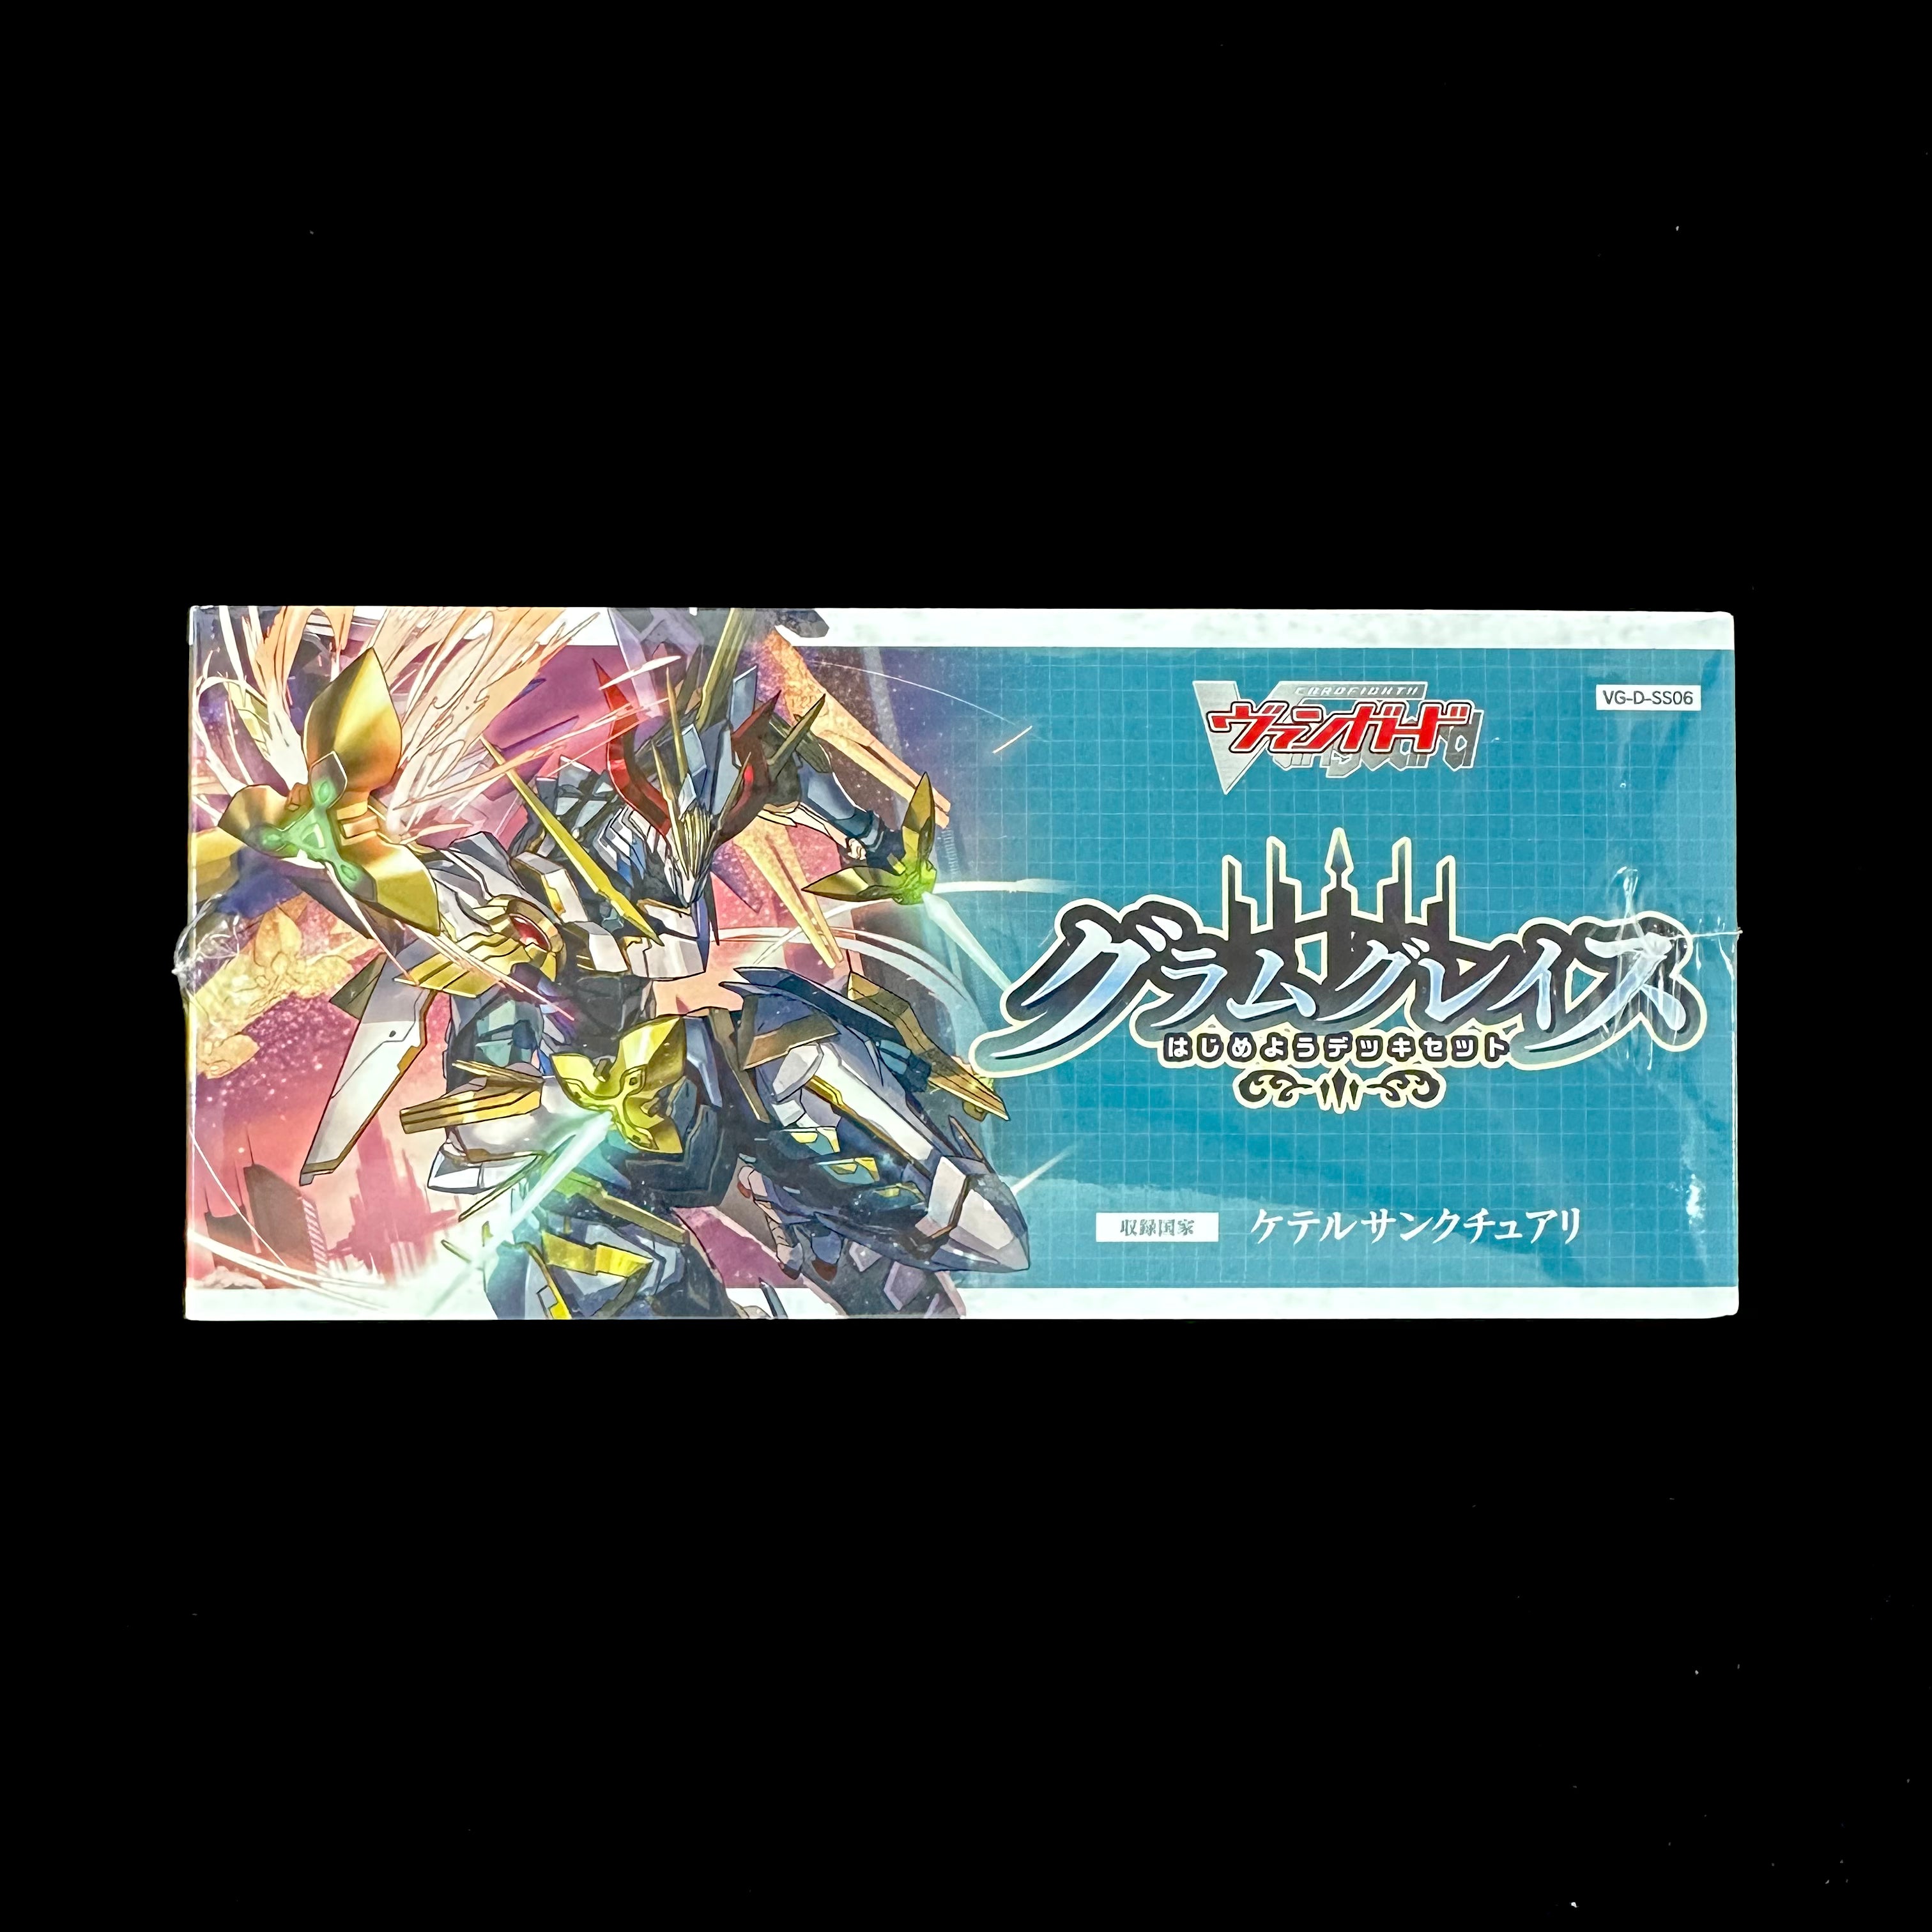 [VG-D-SS06] CARDFIGHT!! VANGUARD Special Series 第6弾 ｢Getting Started Deck Set Gramgrace｣